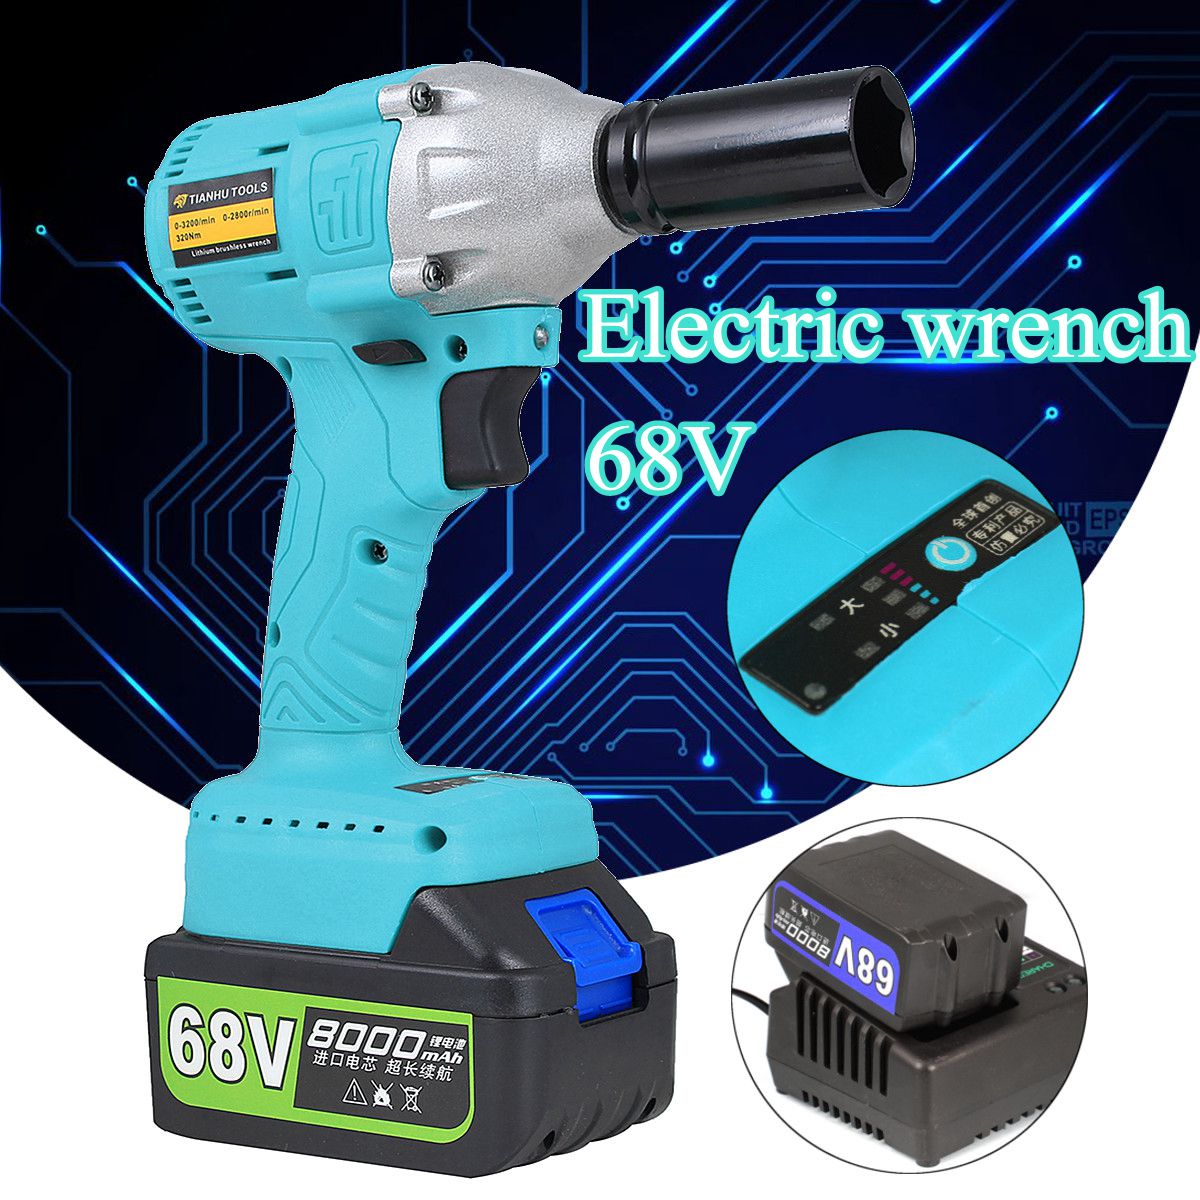 8000mAh-68V-Lithium-Ion-Brushless-Cordless-High-Torque-Square-Drive-Impact-Wrench-1262426-2